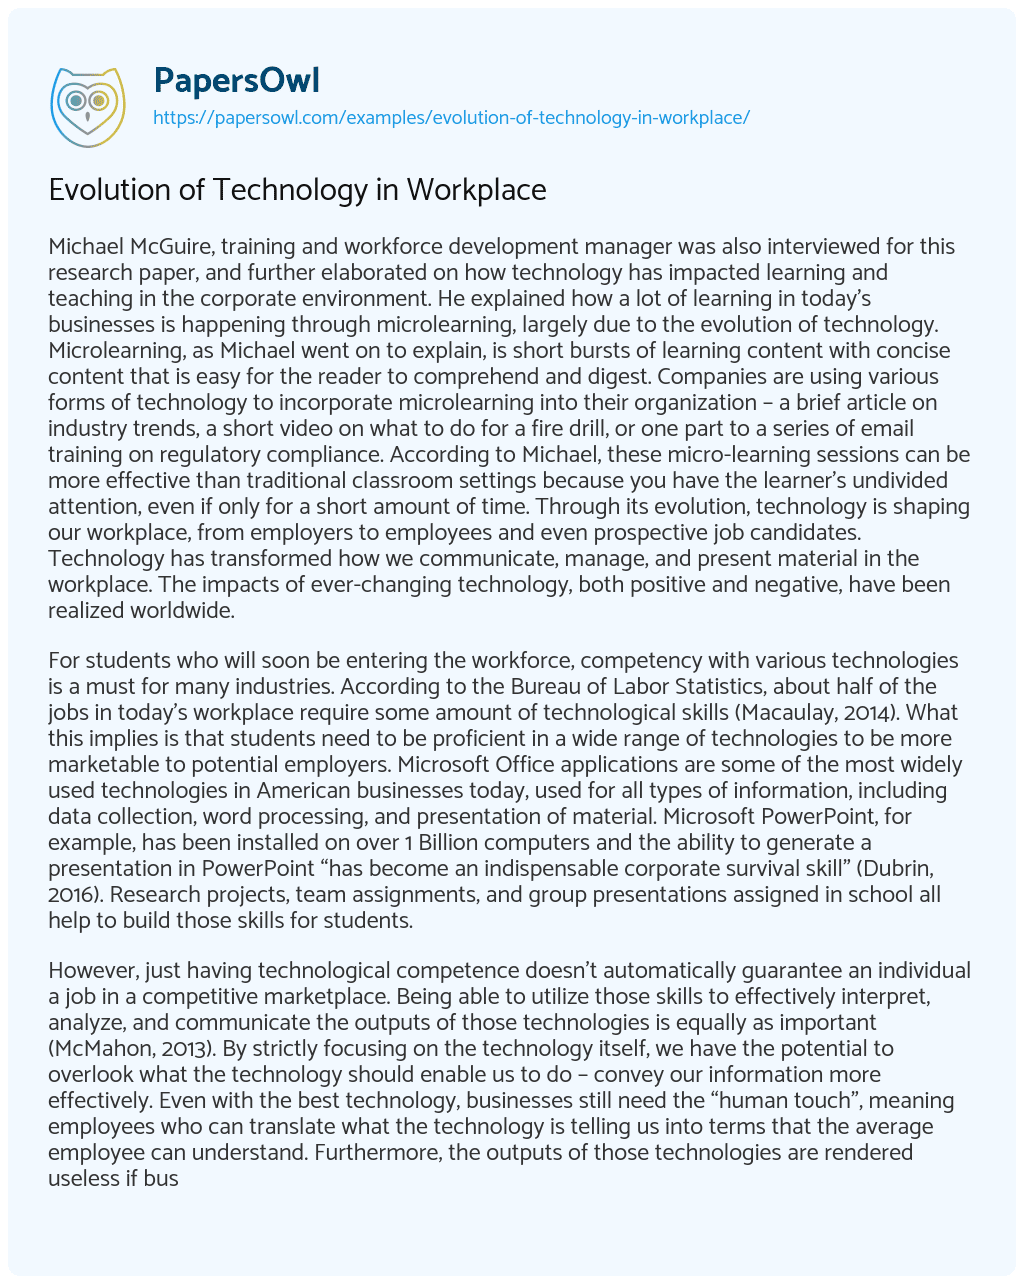 Essay on Evolution of Technology in Workplace